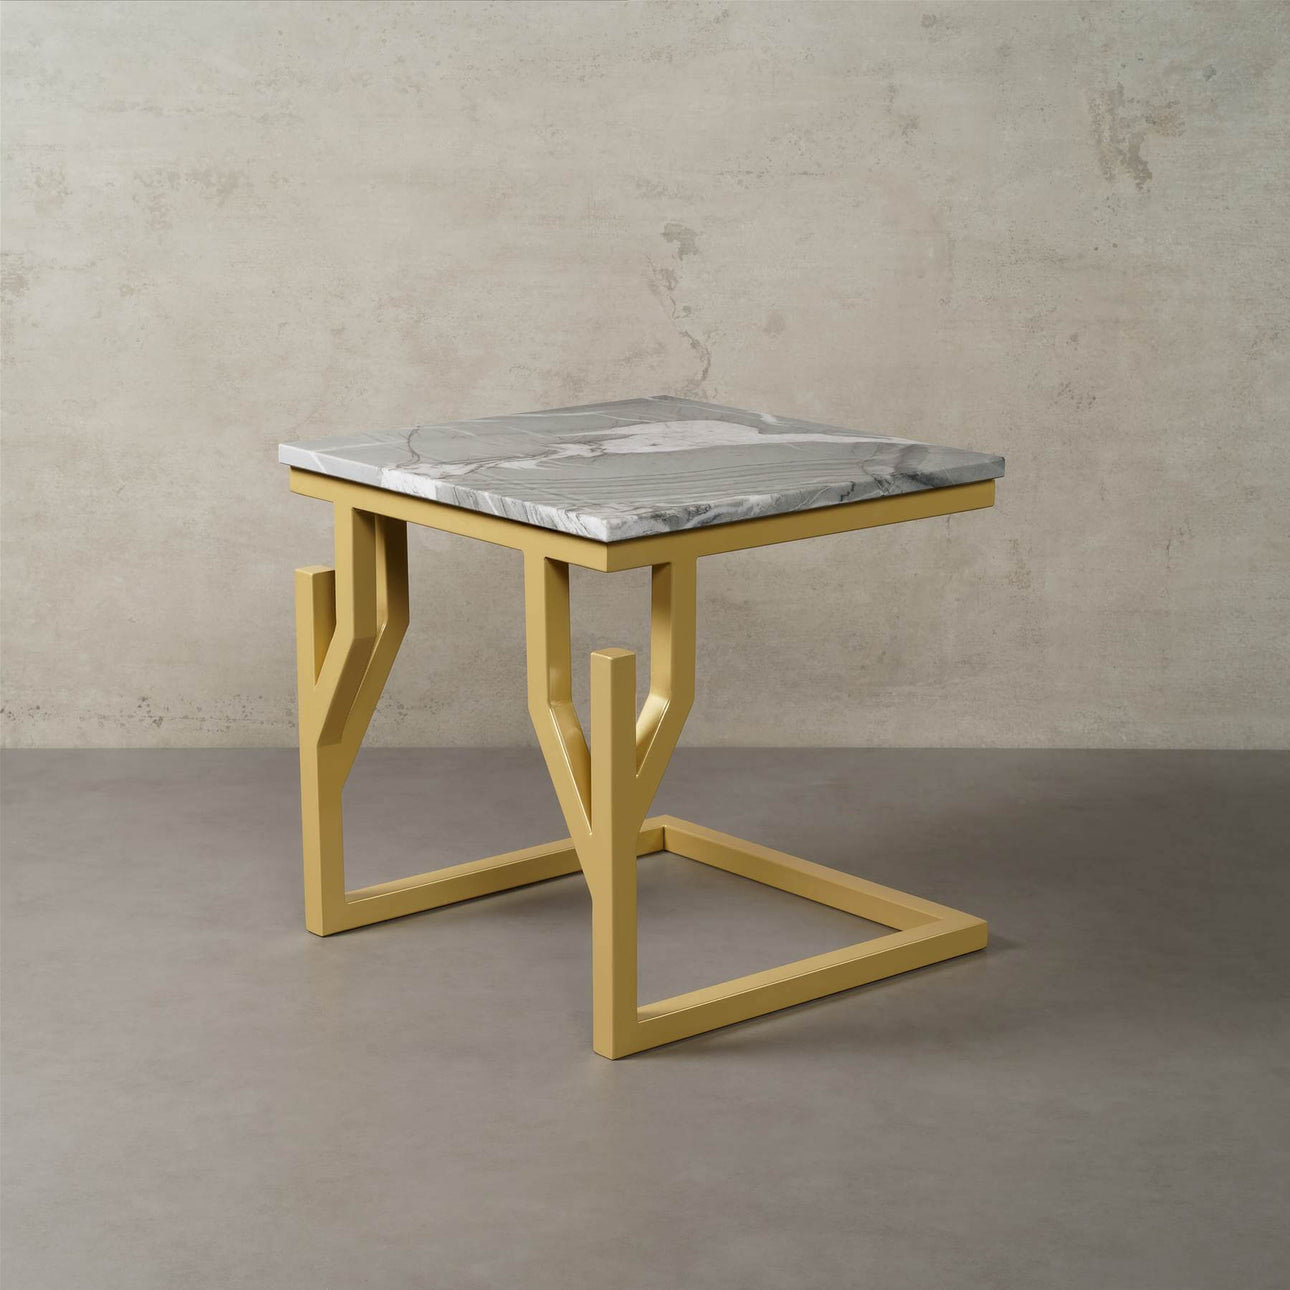 Coral Bay marble side table